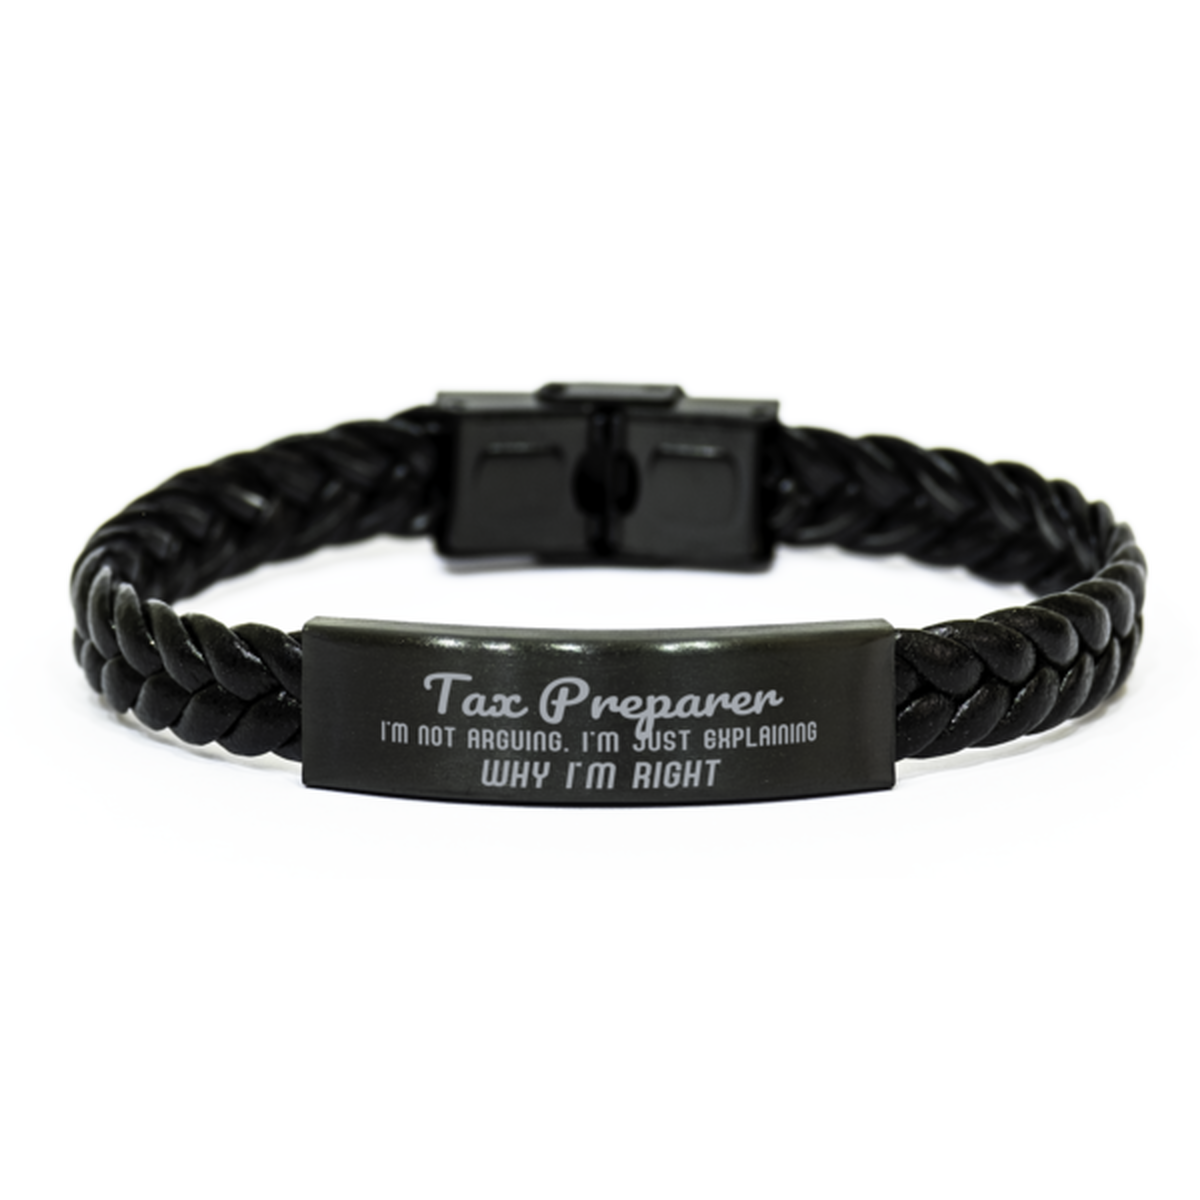 Tax Preparer I'm not Arguing. I'm Just Explaining Why I'm RIGHT Braided Leather Bracelet, Graduation Birthday Christmas Tax Preparer Gifts For Tax Preparer Funny Saying Quote Present for Men Women Coworker